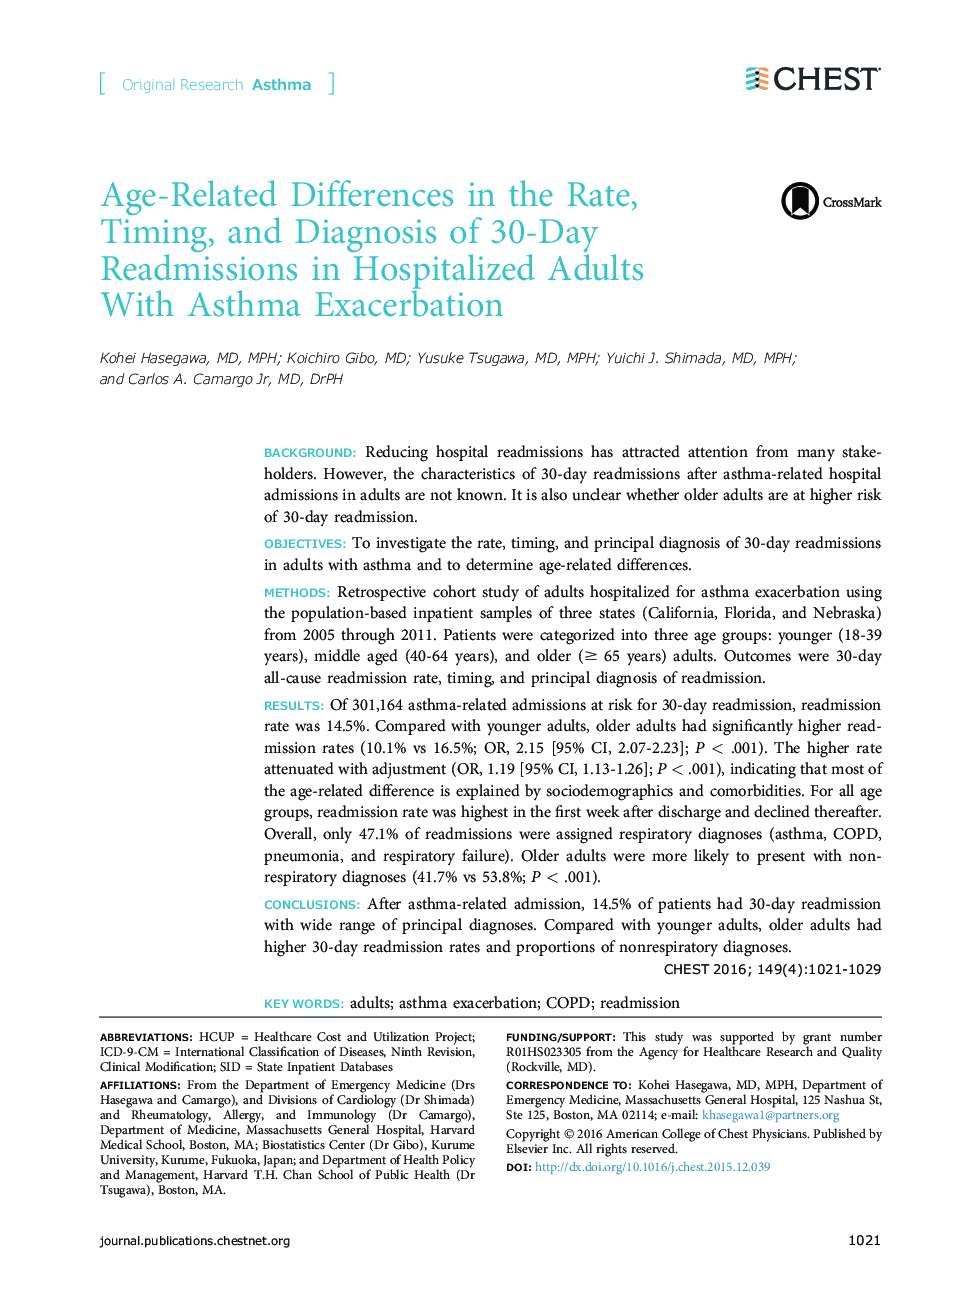 Age-Related Differences in the Rate, Timing,Â and Diagnosis of 30-Day Readmissions in Hospitalized Adults WithÂ Asthma Exacerbation